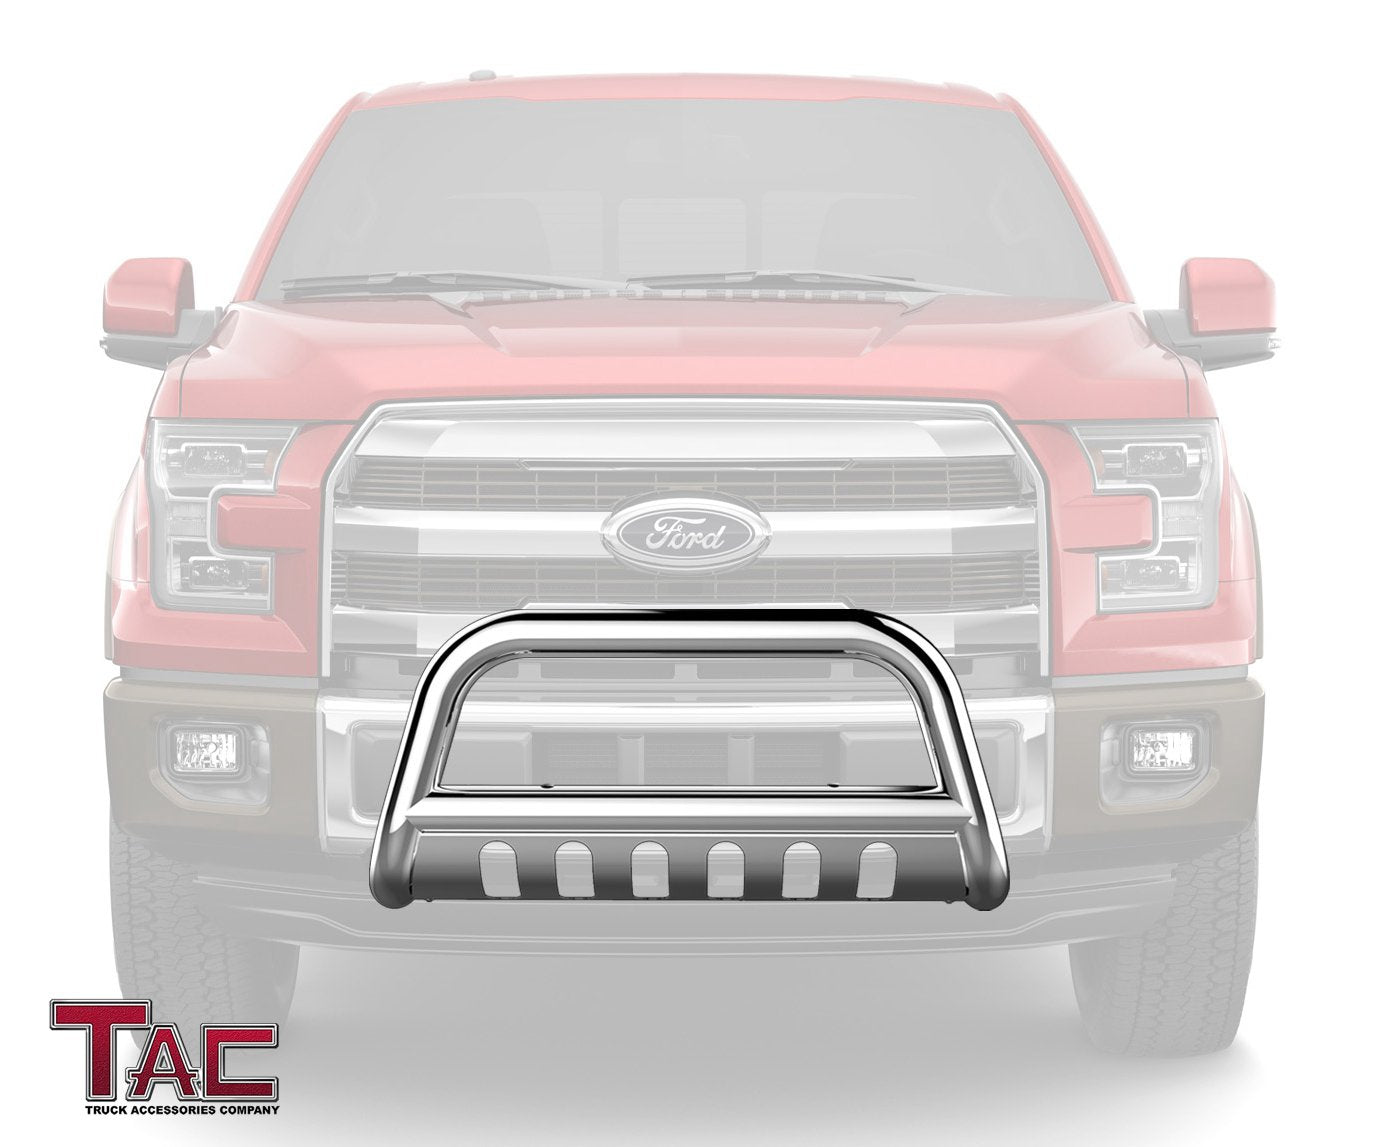 TAC Stainless Steel 3" Bull Bar For 2004-2024 Ford F150 | 2022-2024 F150 Lightning EV (Excl. Heritage Edition and all F150 Raptor Models/2020-2022 Diesel models ) Truck/ 2003-2017 Ford Expedition SUV Front Bumper Brush Grille Guard Nudge Bar - 0